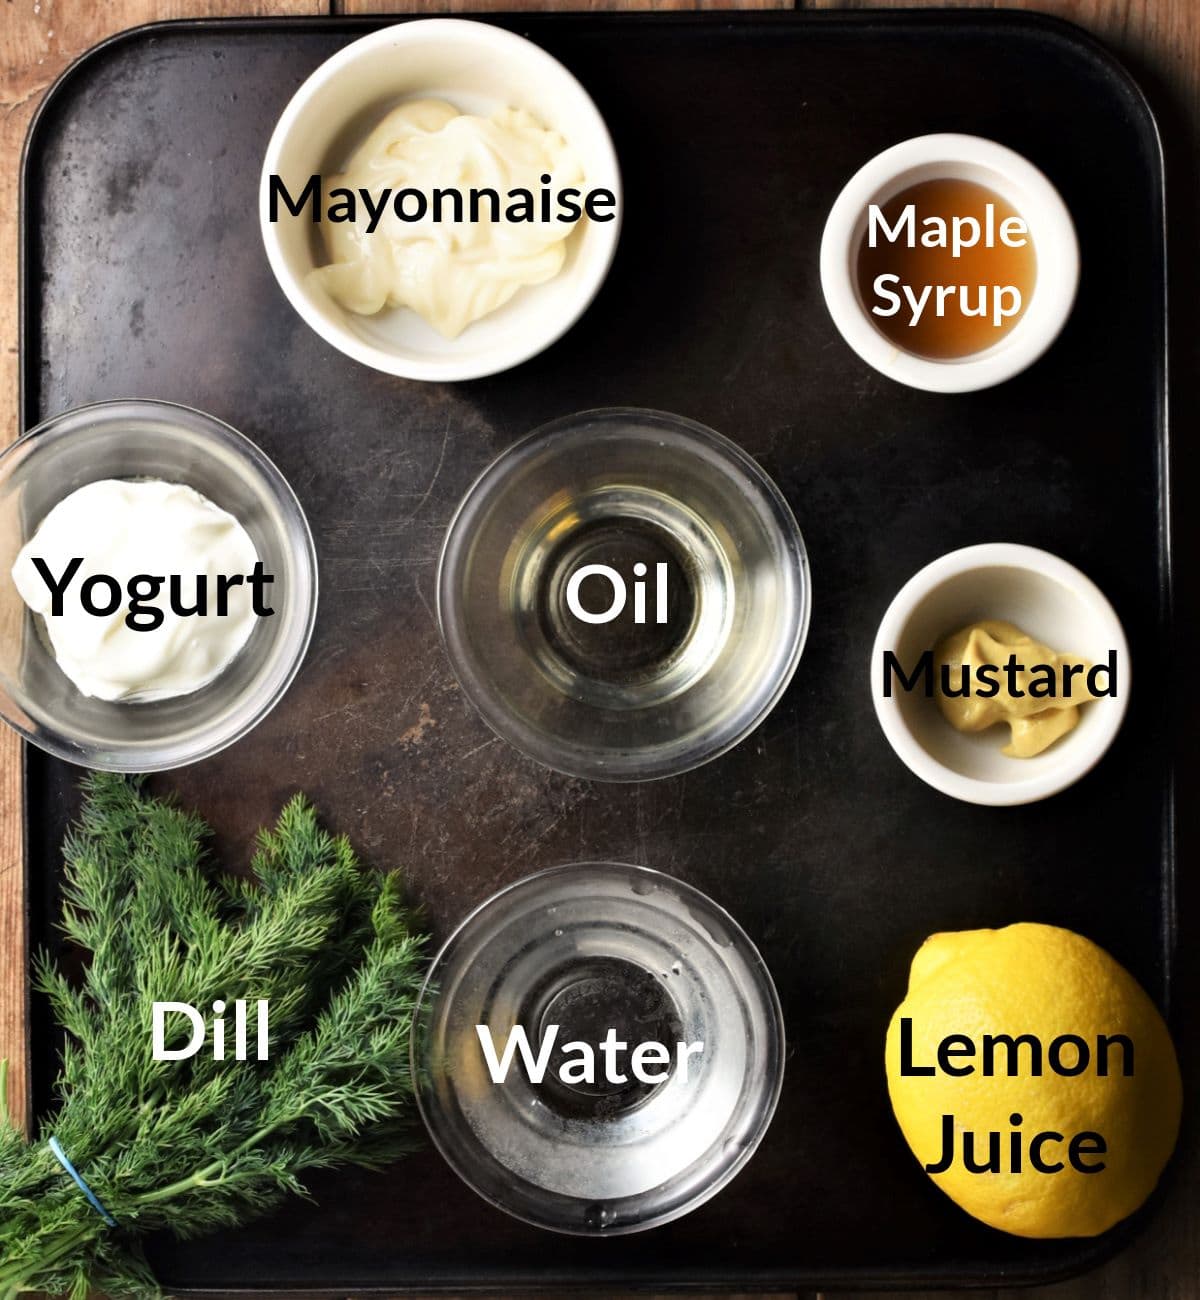 Ingredients for making dill salad dressing.